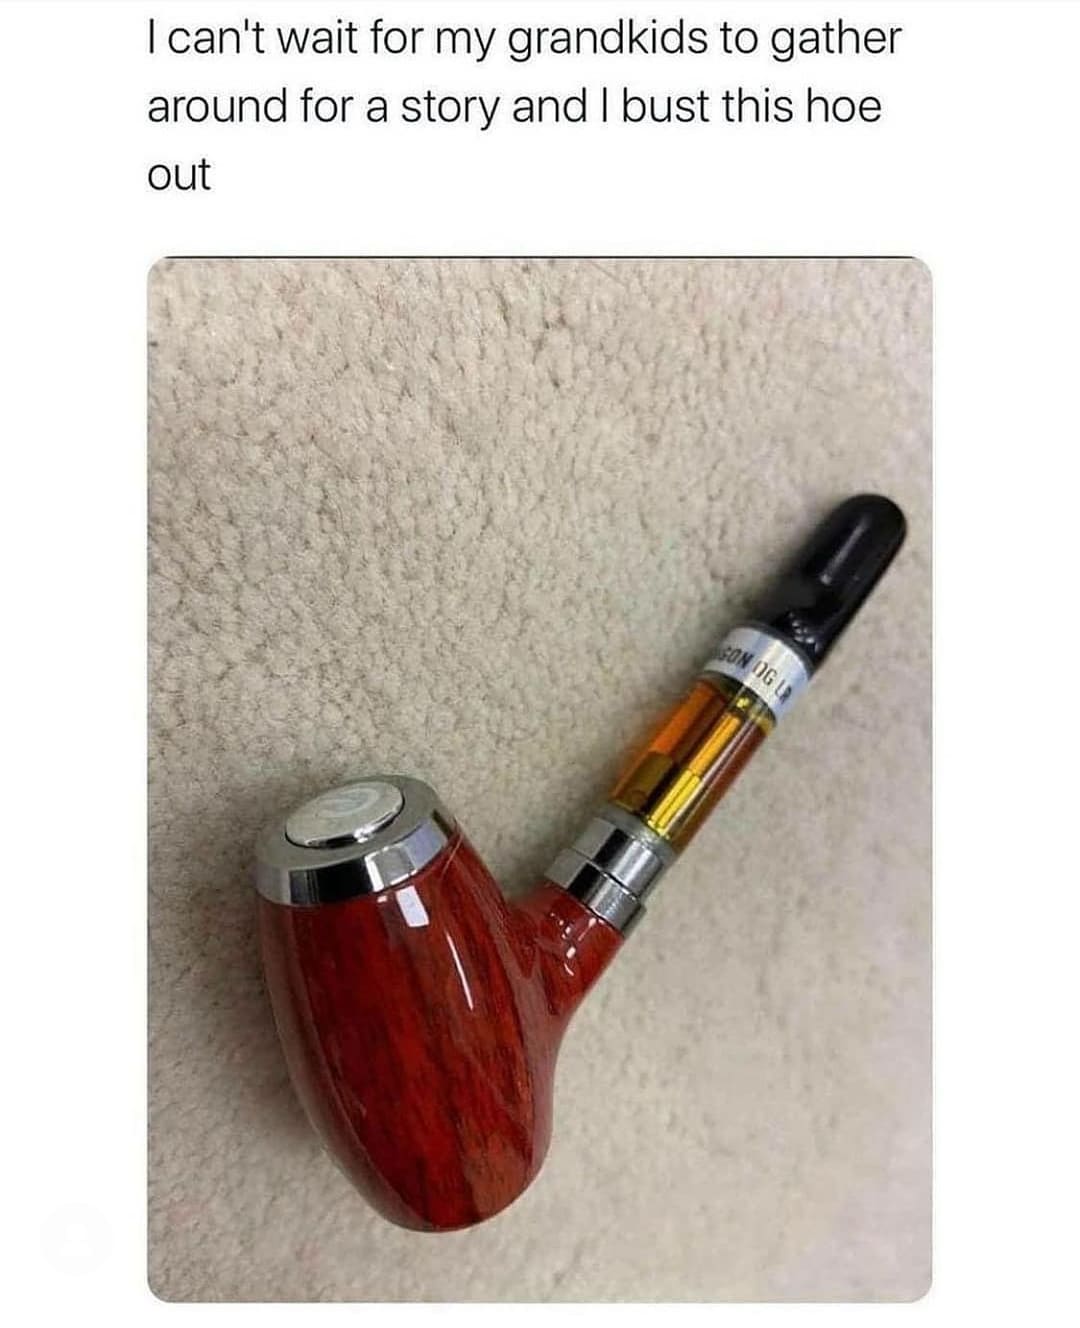 Didn't know vapes could look so stylish.